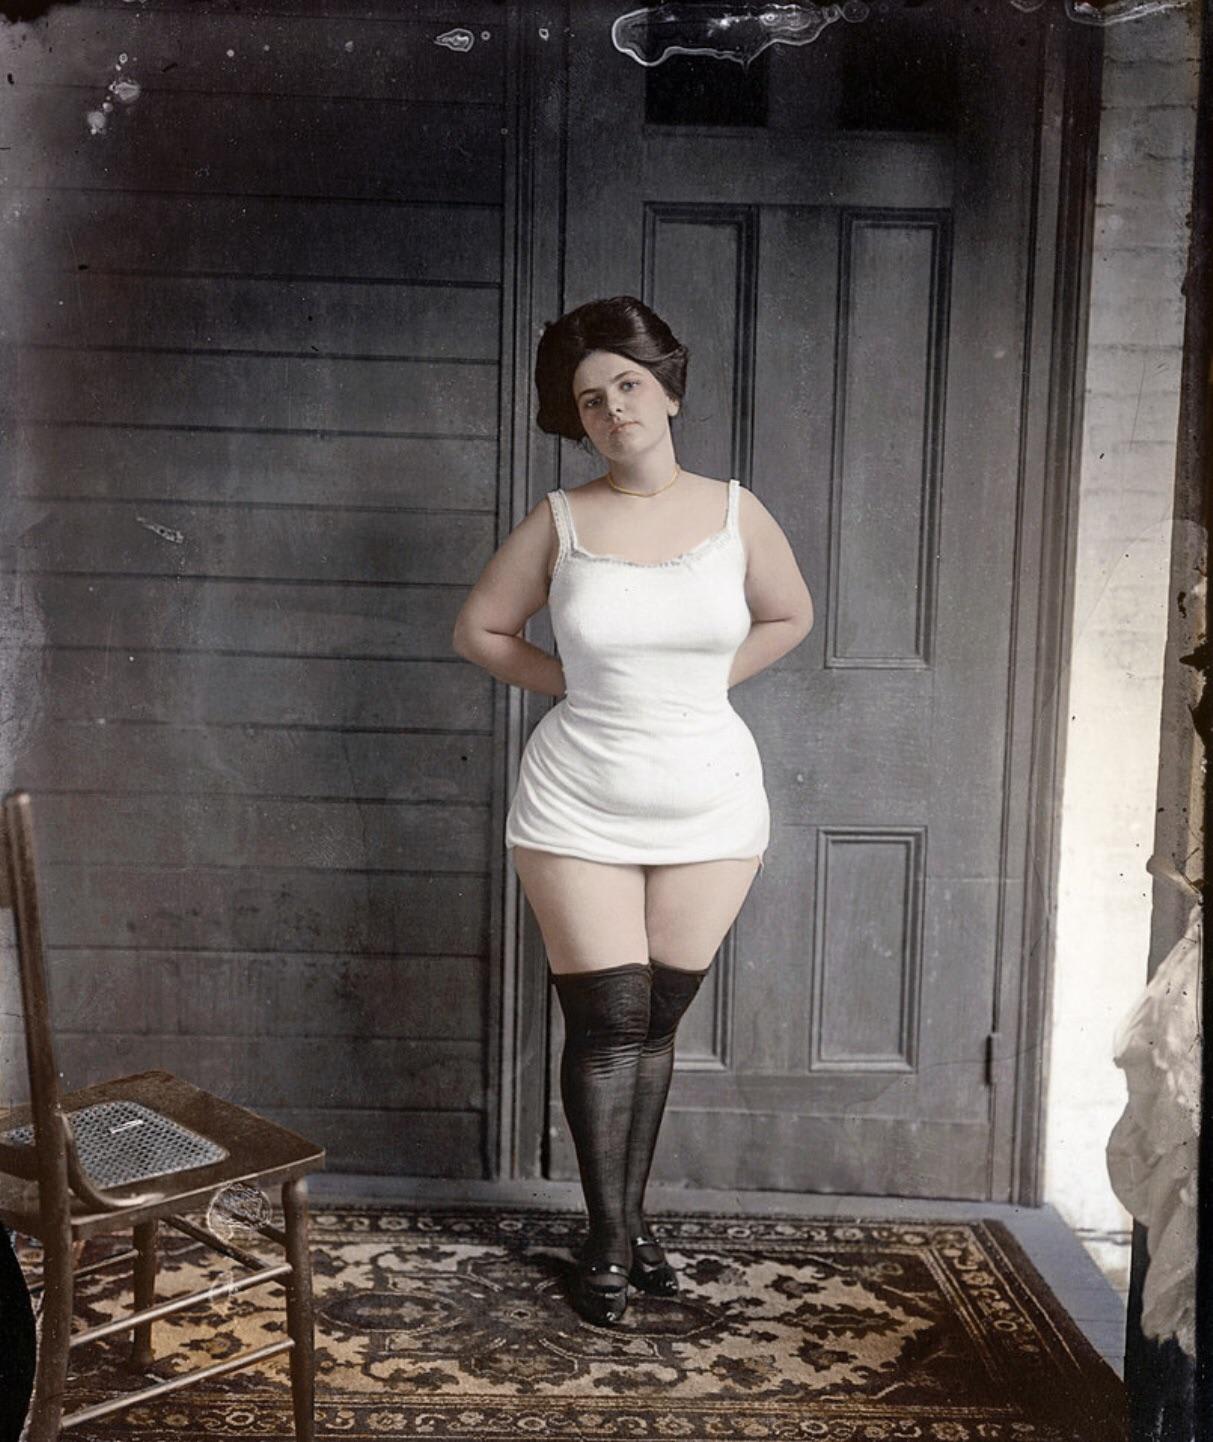 1912 New Orleans sex worker(colourised